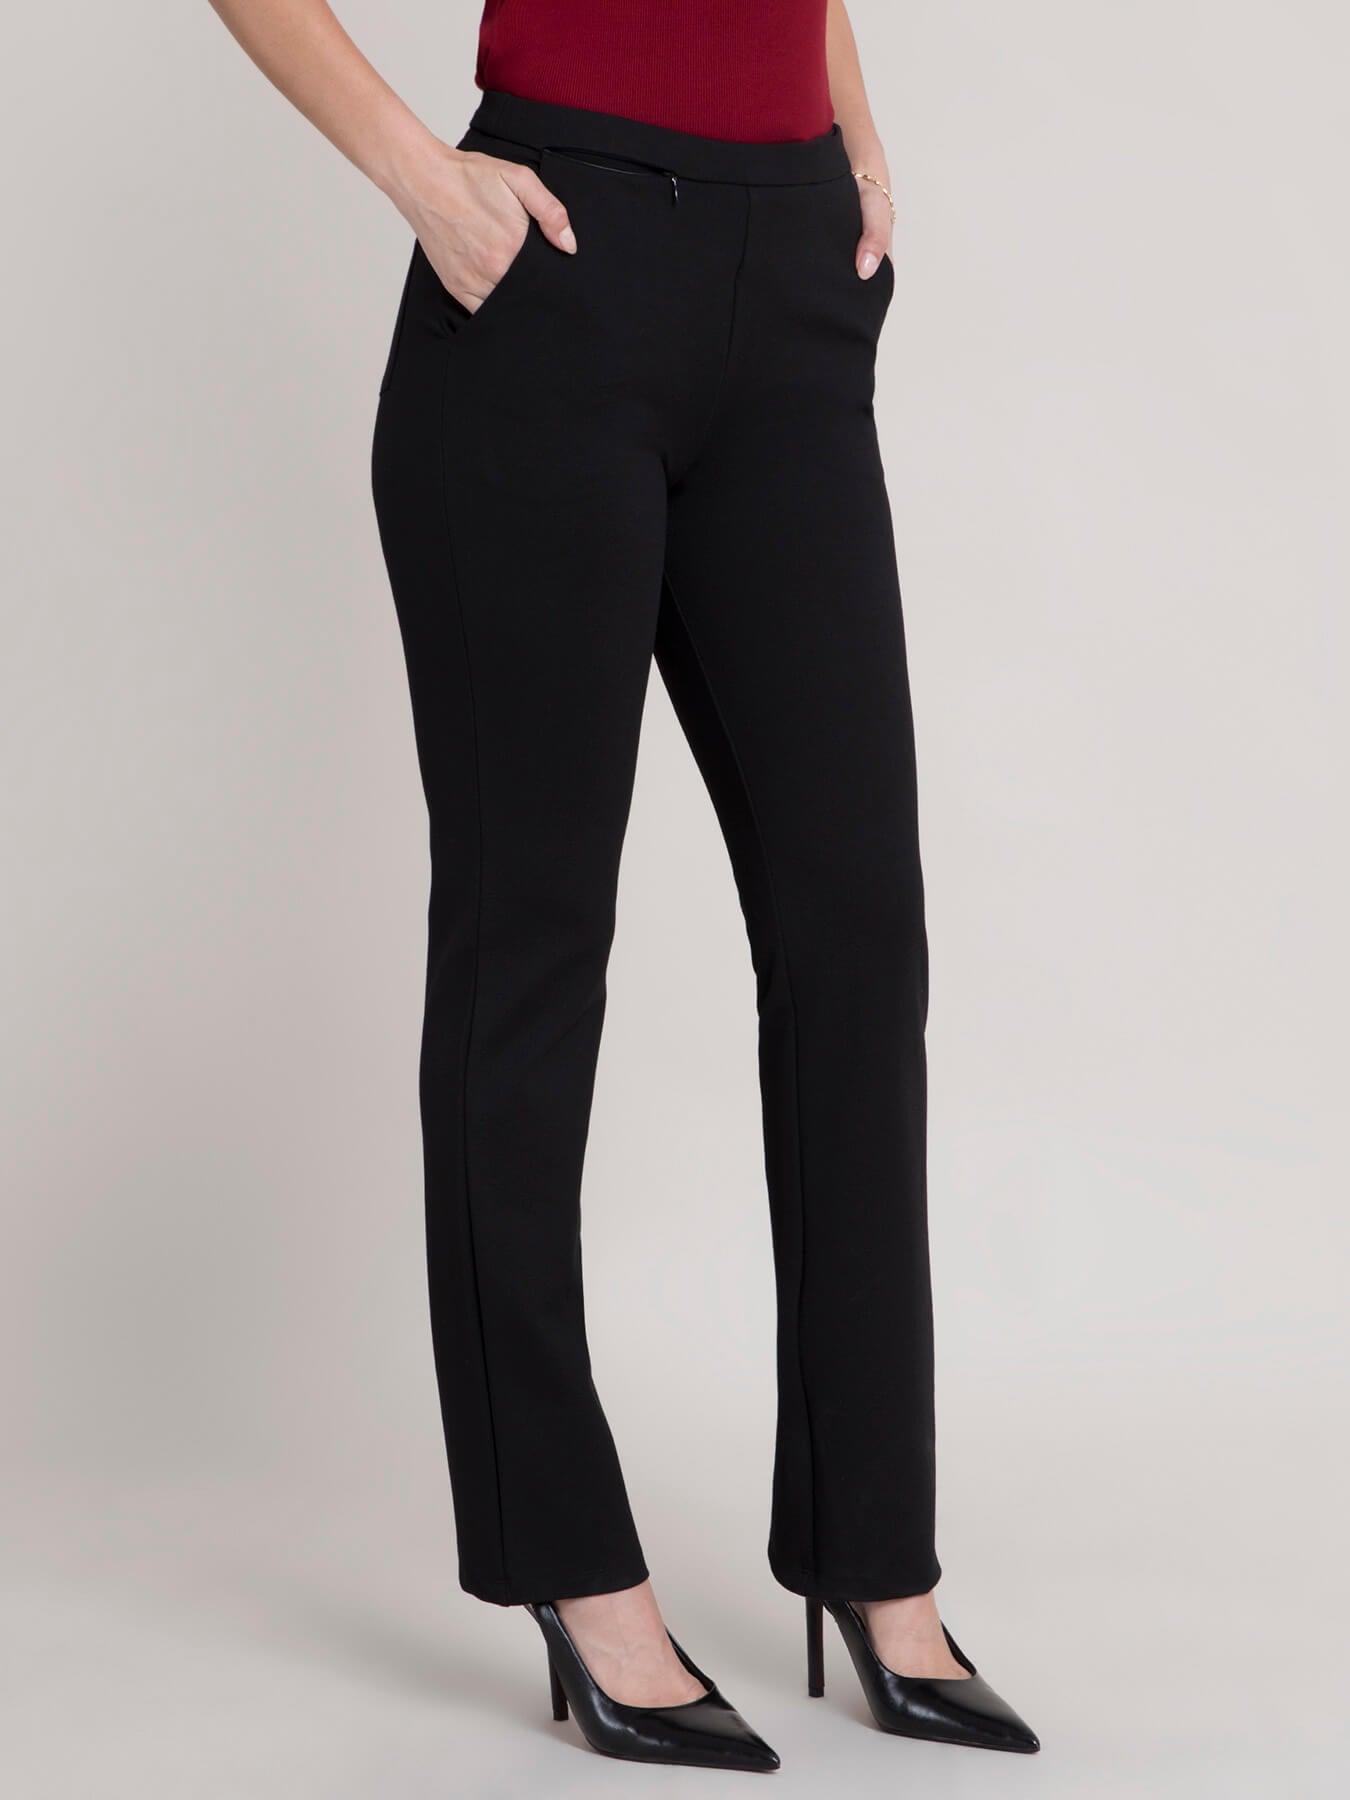 4 Way Stretch Bootcut LivIn Pants - Black| Formal Trousers